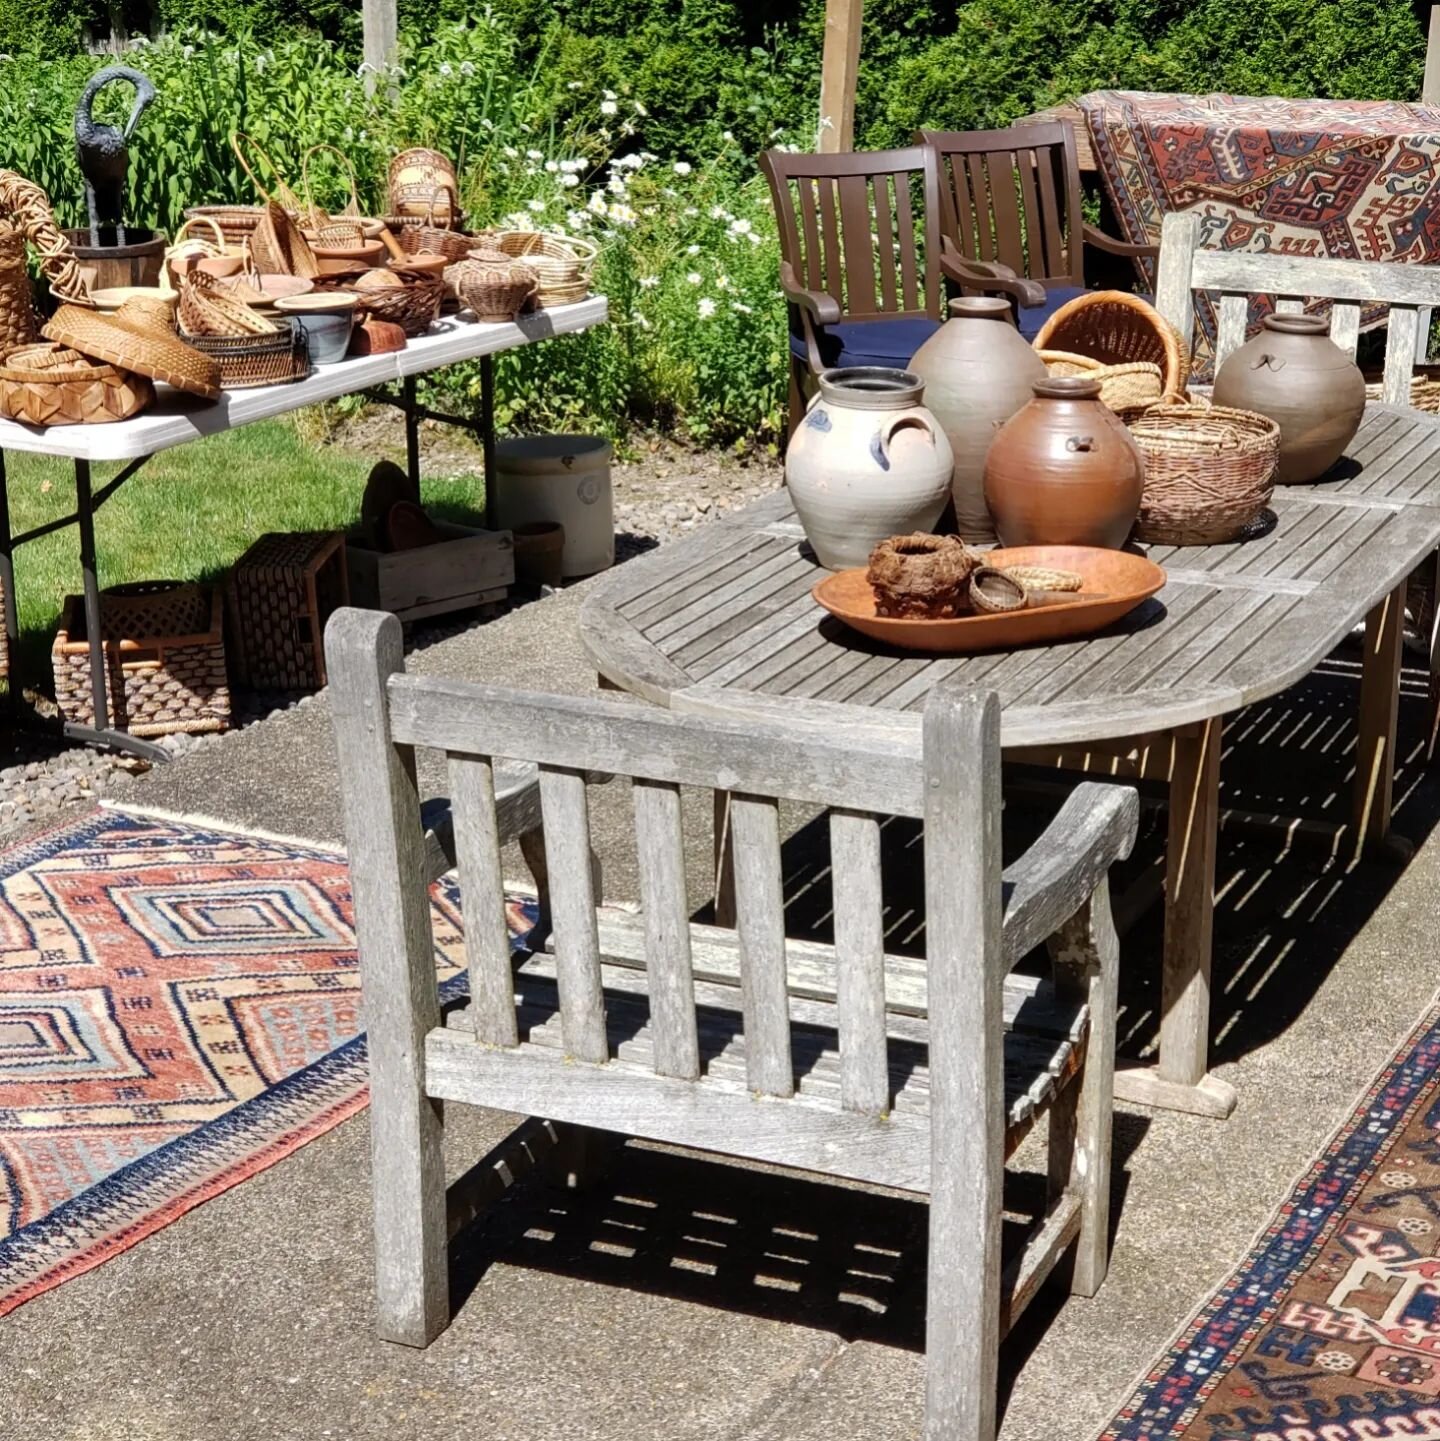 Our estate sale in Hillsboro, OR  this weekend has *incredible* treasures from around the world, both contemporary and vintage...the rugs alone have us swooning!  Also, stunning vintage clothing, everything kitchen, furniture (for indoors and outside